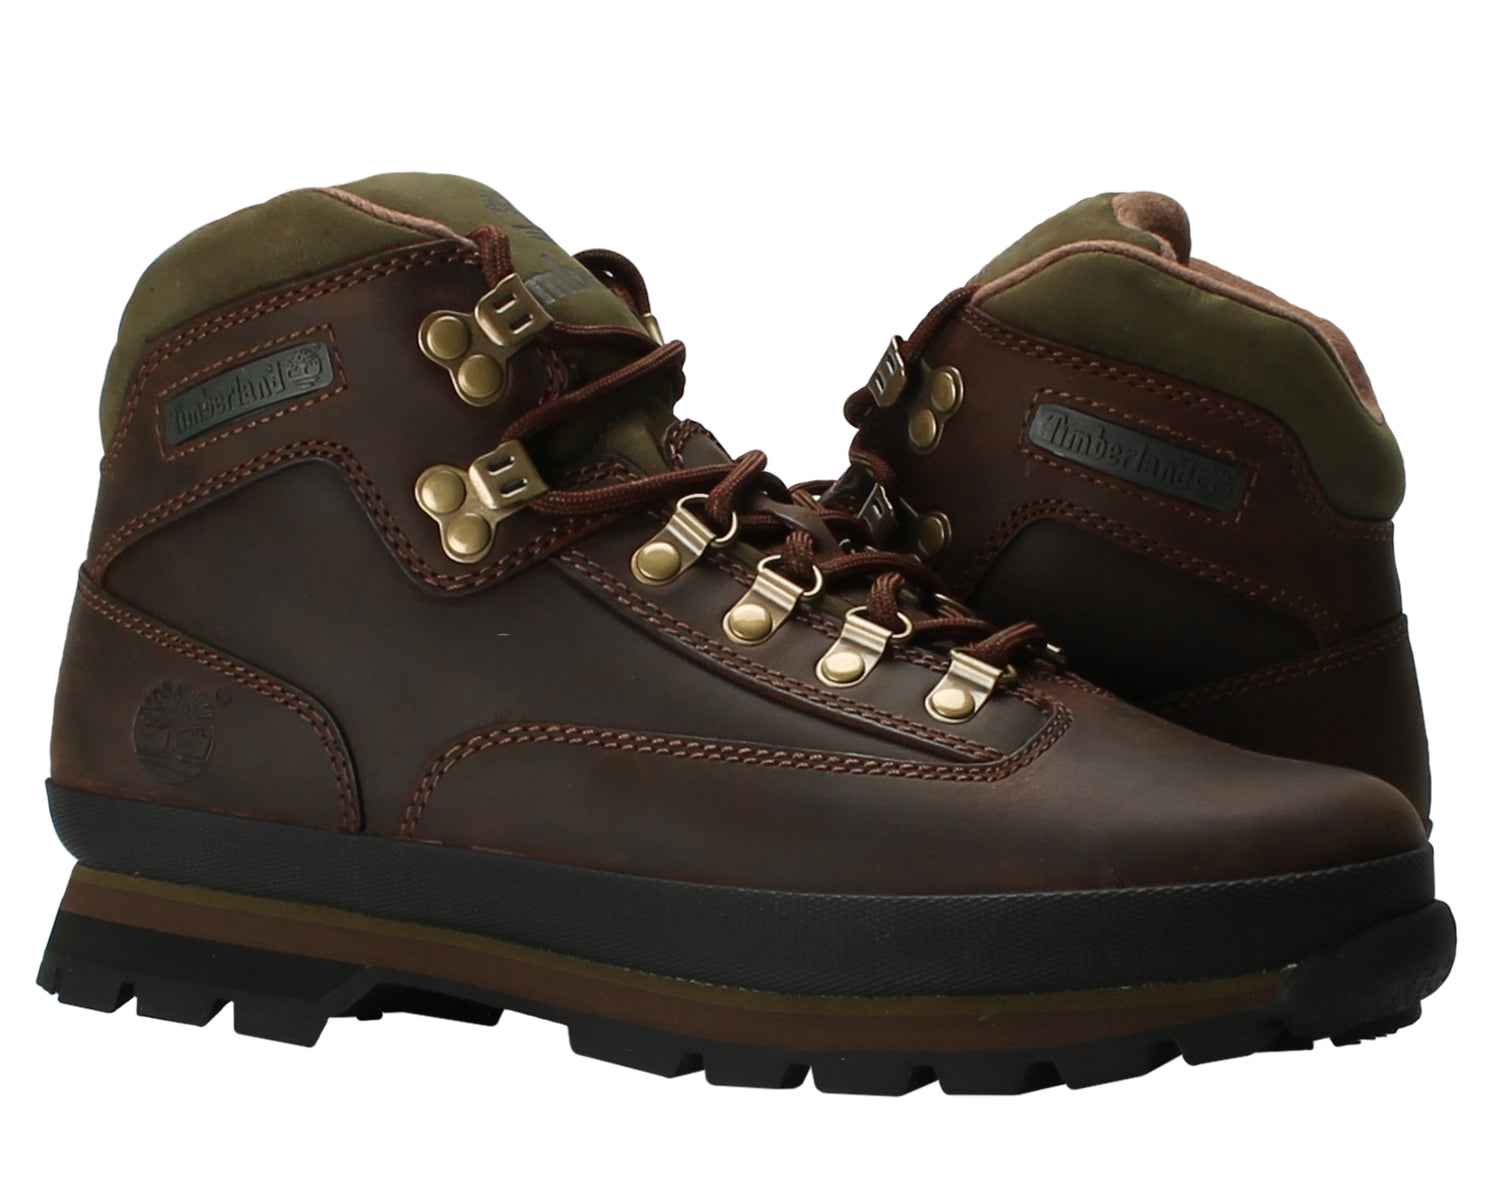 Timberland Euro Hiker Oiled Leather Men's Hiking Boots